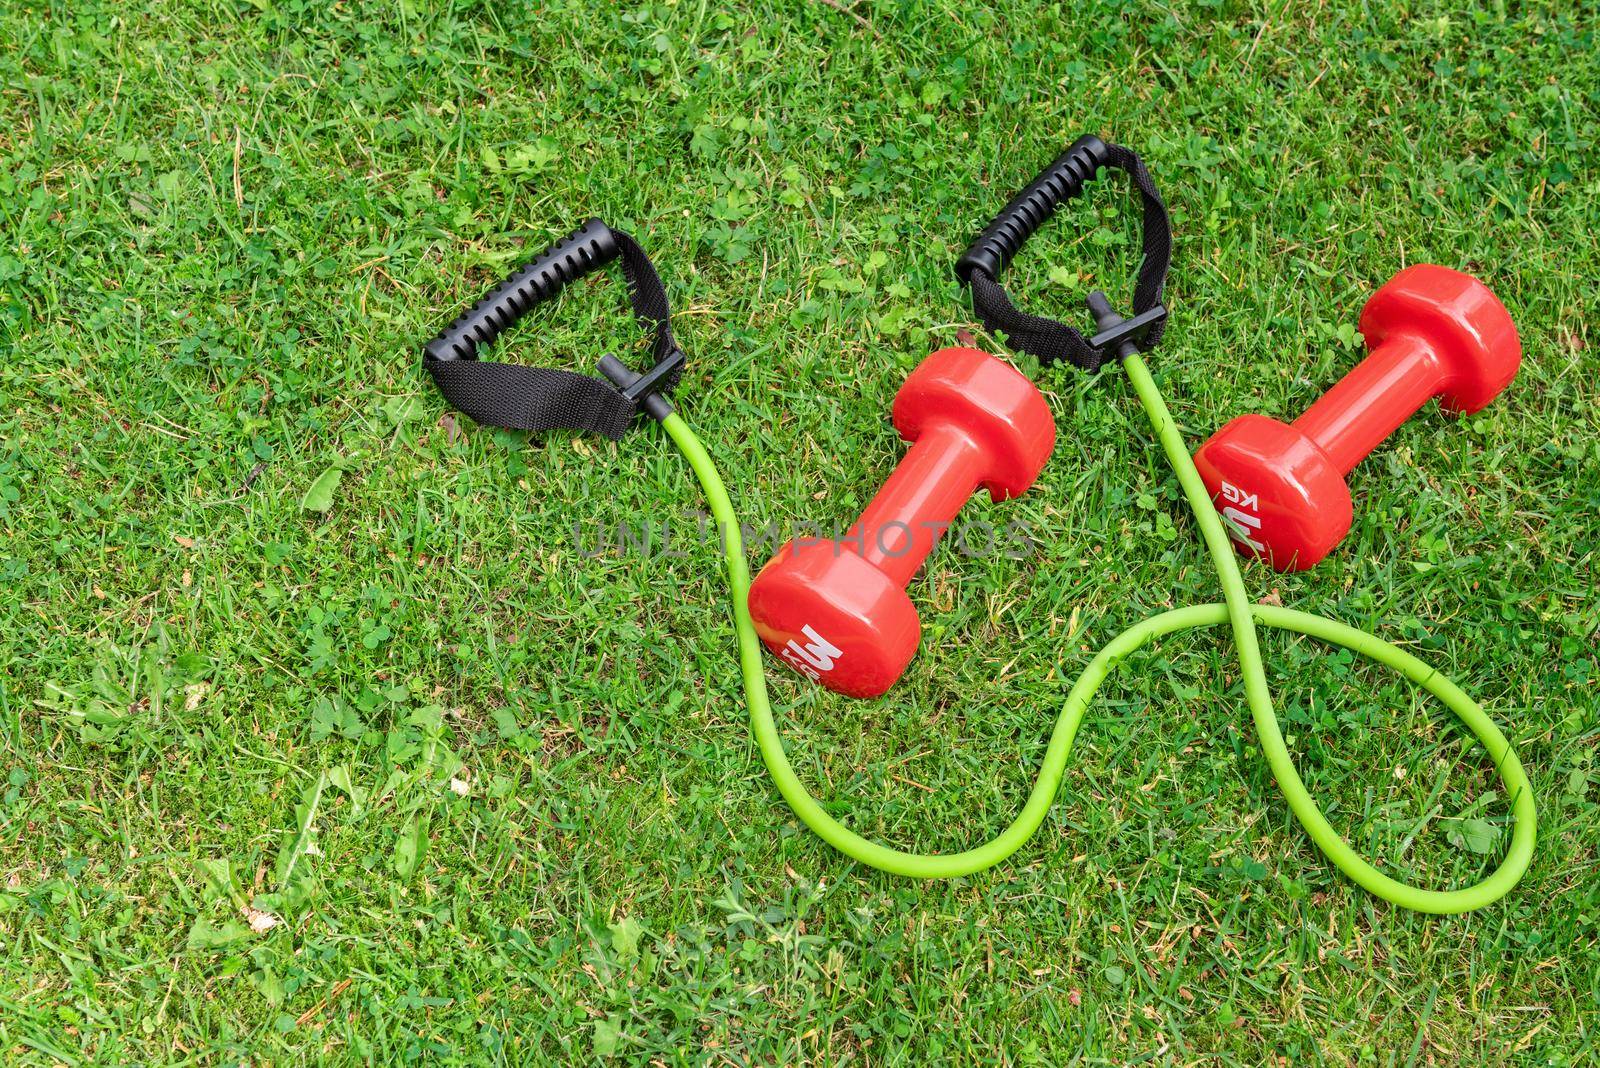 Ladie's dumbbells and fit tube the green grass background, top view. Outdoor training concept. Copy-space by anytka